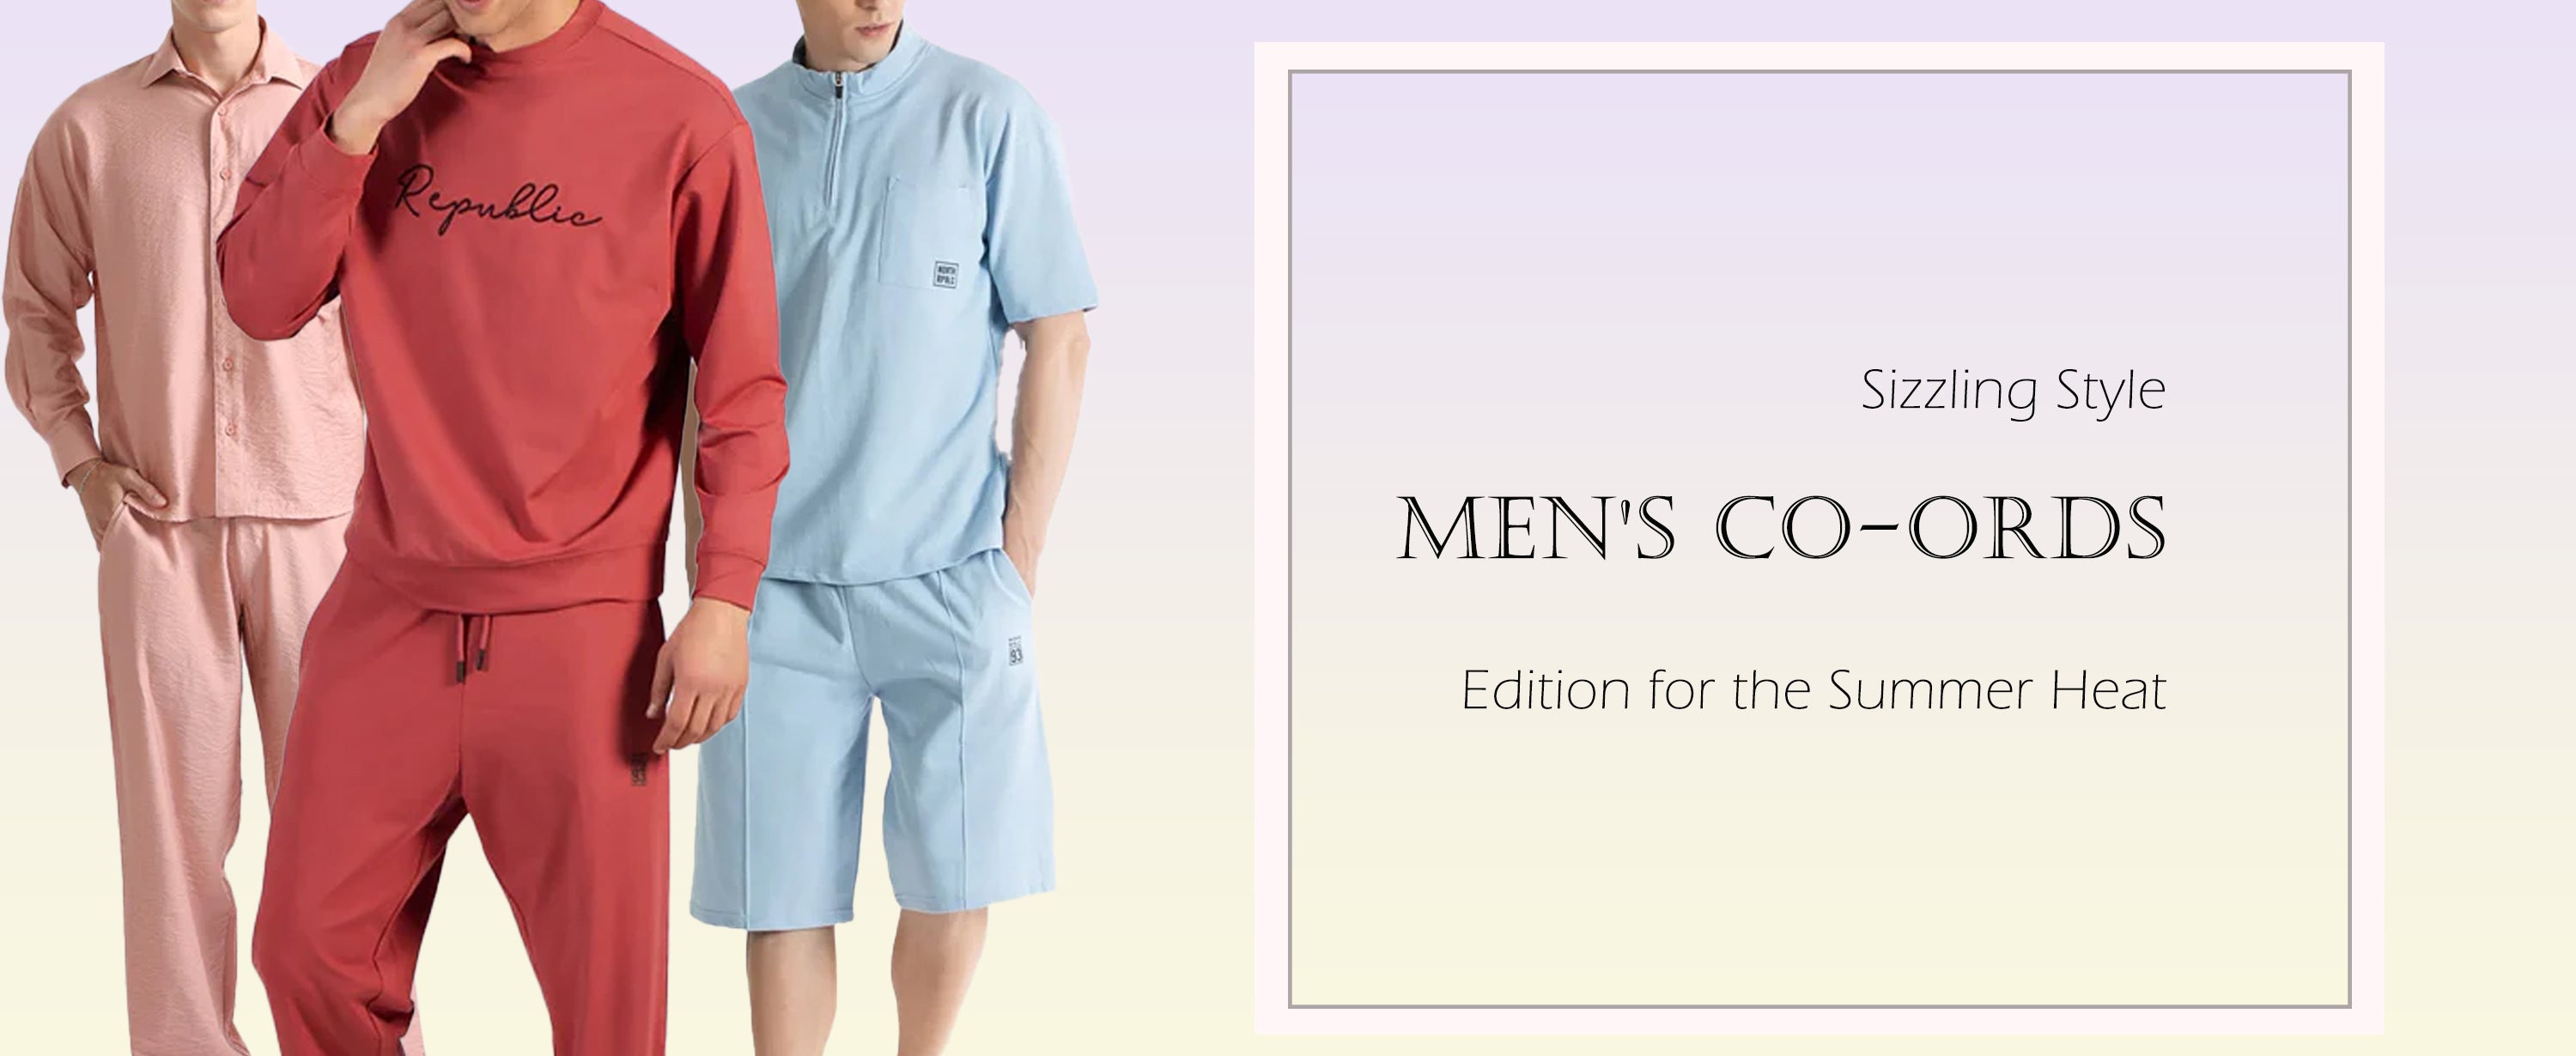 Sizzling Style: Men's Co-ords Edition for the Summer Heat